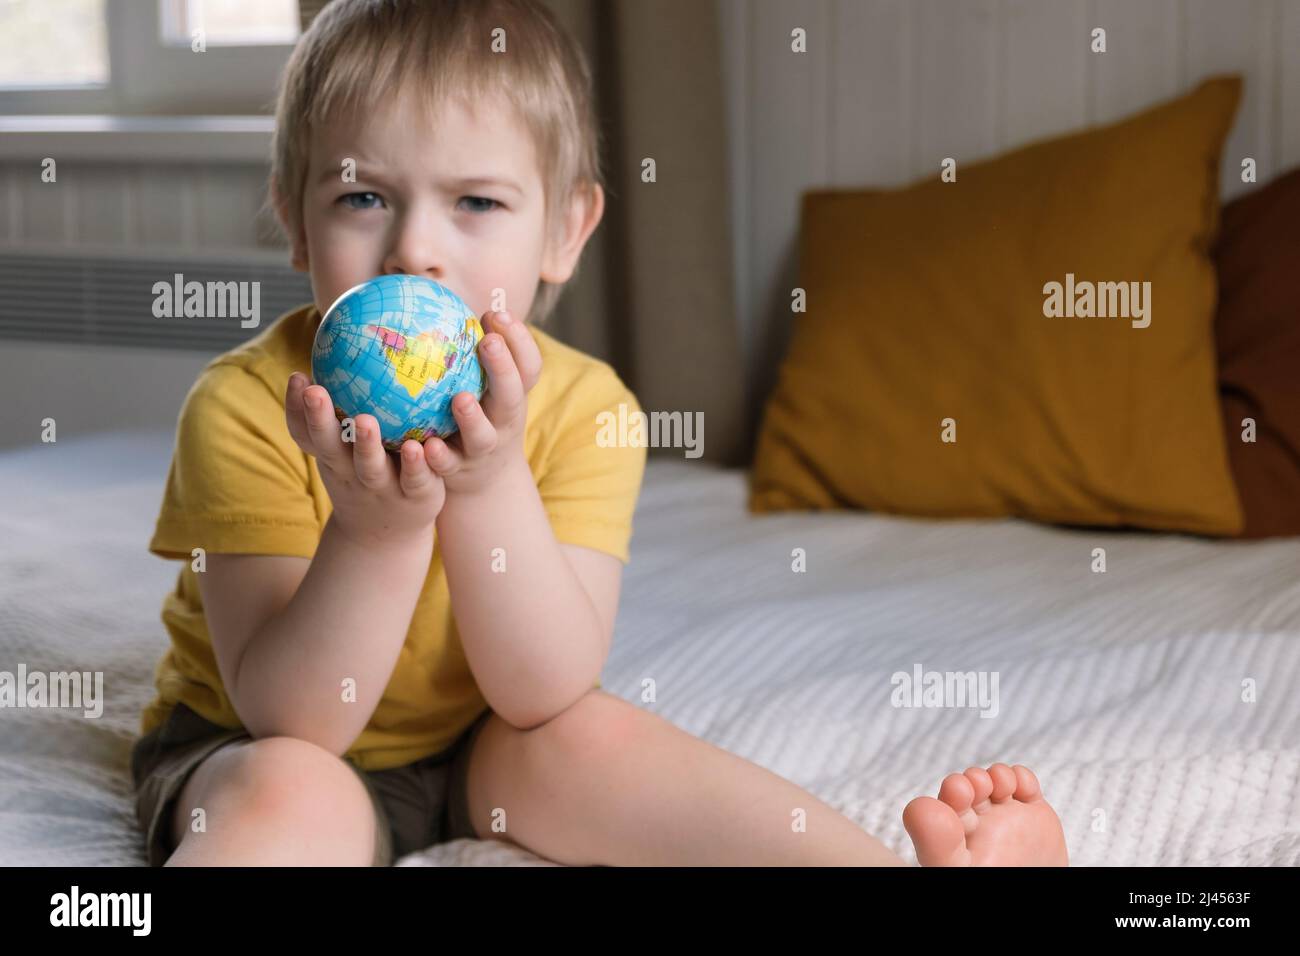 Child boy with blonde hair hugging earth globe, save earth concept. 3 years old kid holding globe model. Baby toddler. Children education development Stock Photo